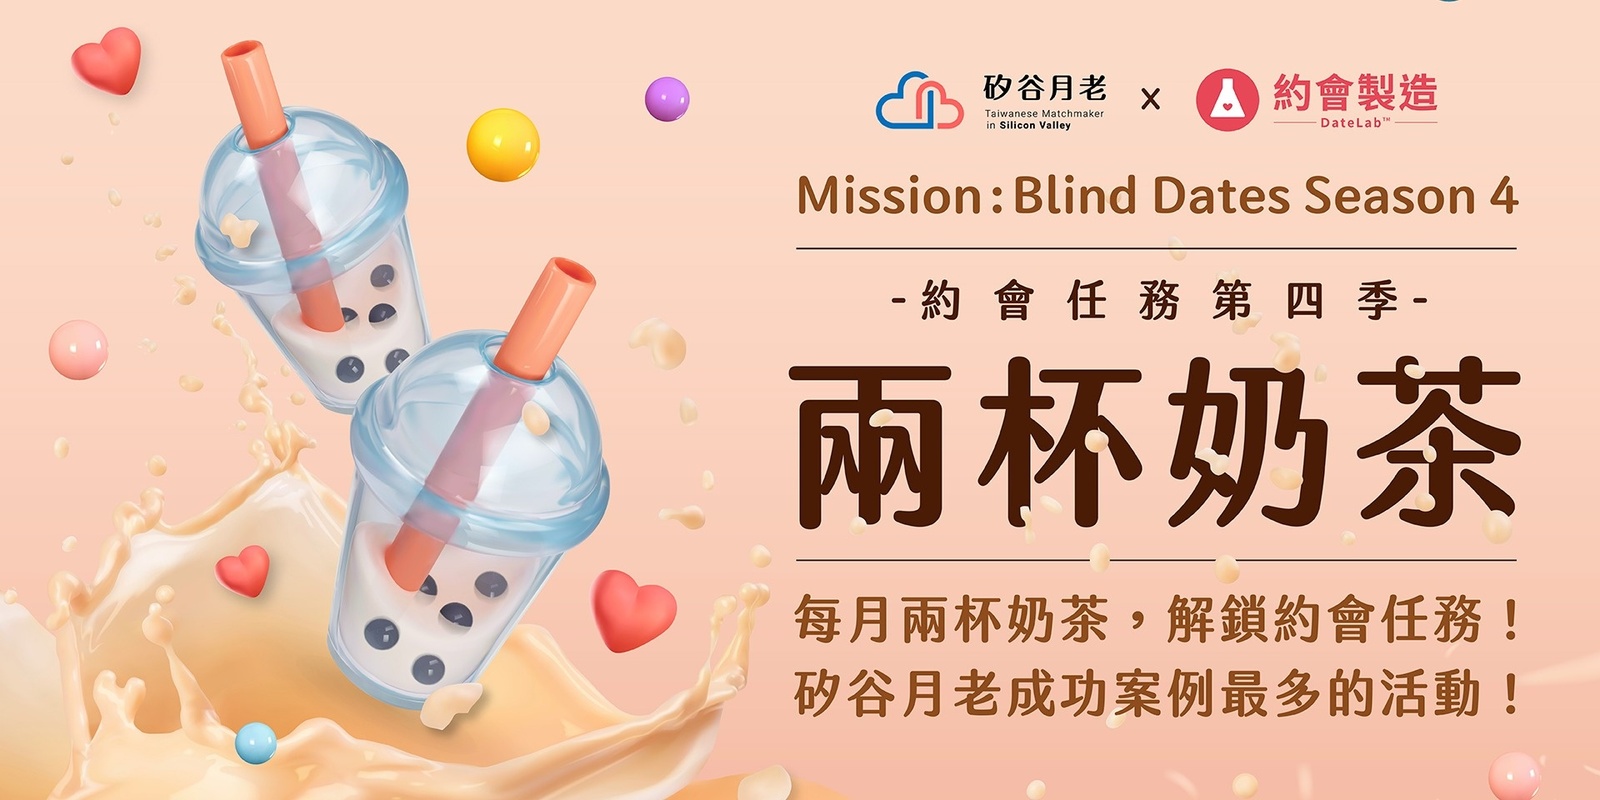 Banner image for 兩杯奶茶 | Mission: Blind Dates Season 4 